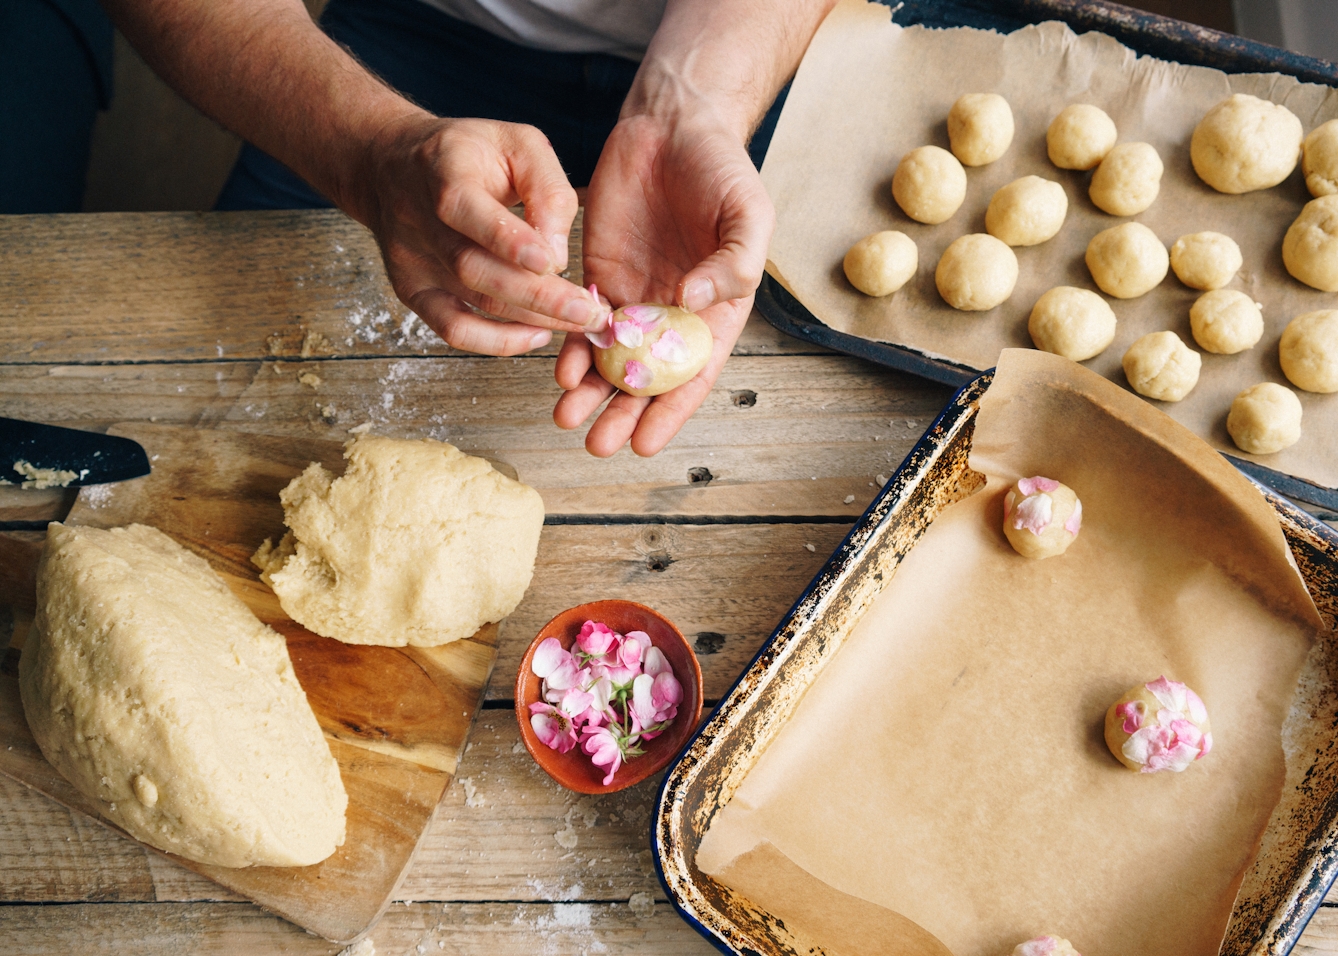 Photograph of a worn wooden kitchen table from above. A man's hands are decorating an uncooked dough ball with flower petals. On the tabletop is a wooden chopping board, two baking trays, lined with greaseproof paper and a small bowl containing flower heads and petals. In the baking trays are other uncooked dough balls.